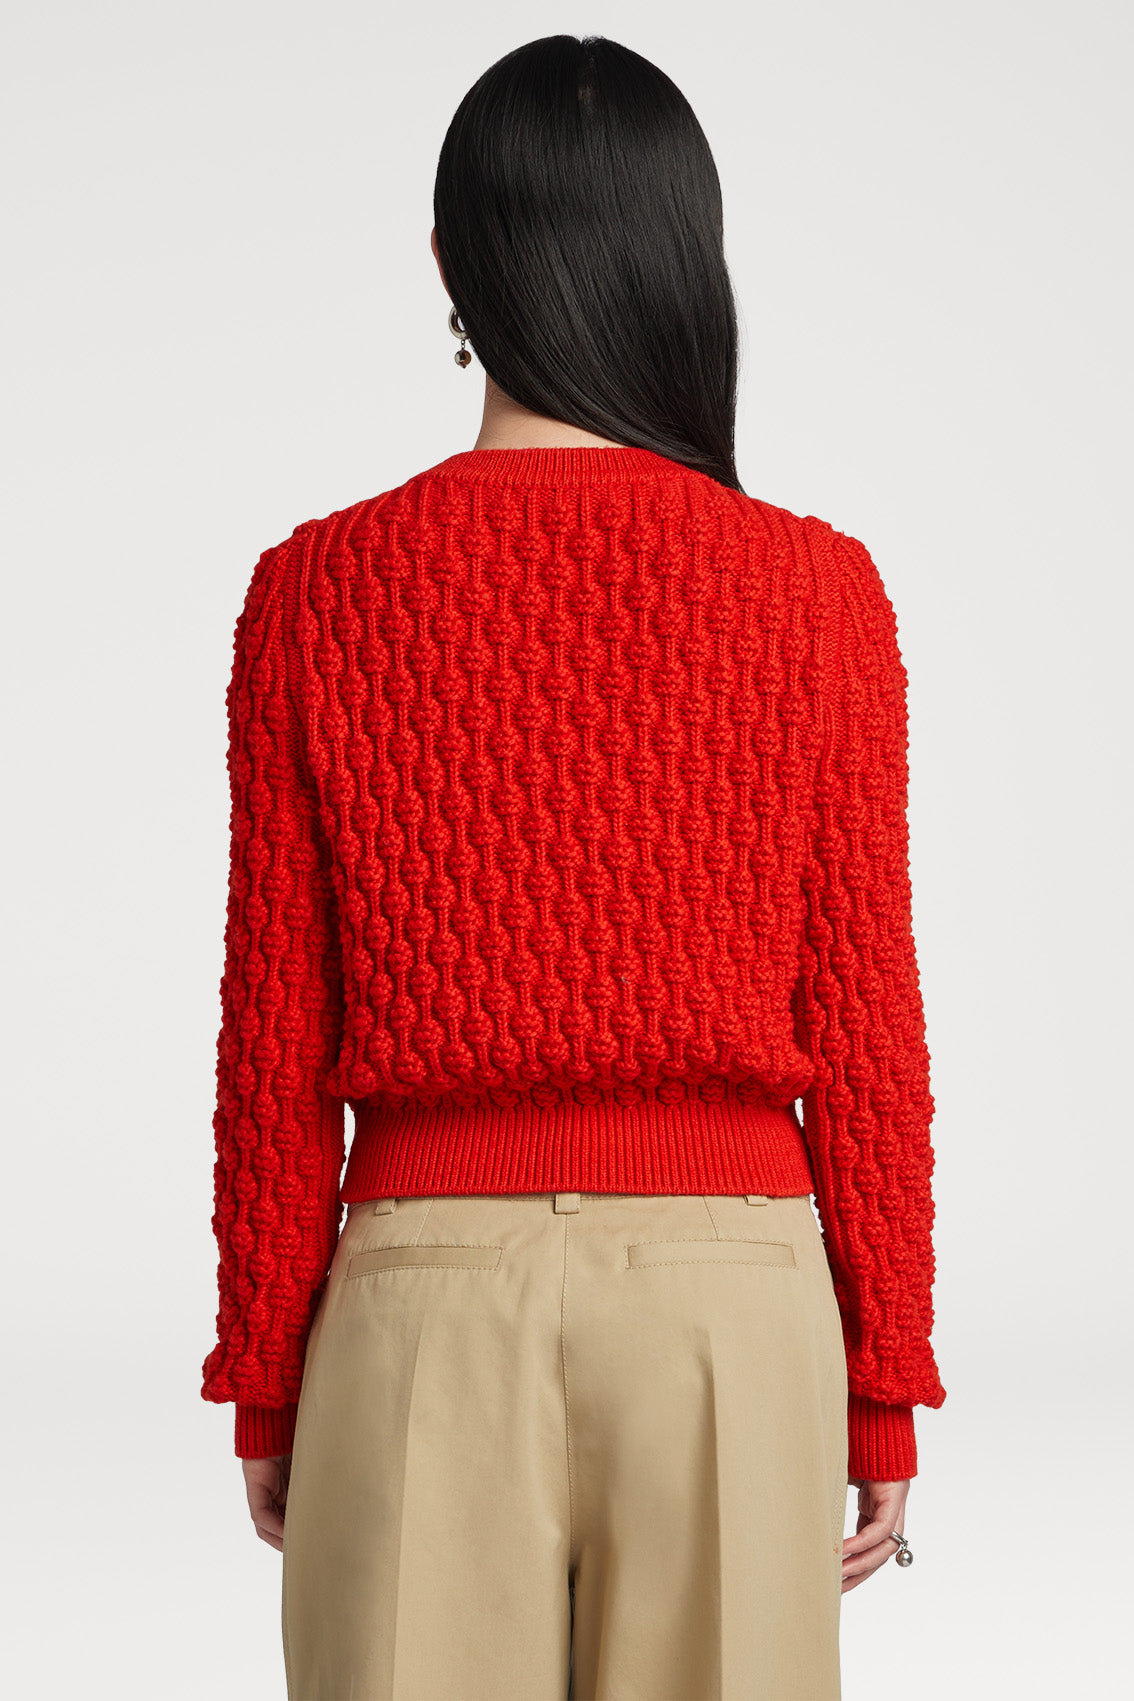 Crew Neck Felted Bubble Long Sleeve Sweater Top in Fire Red